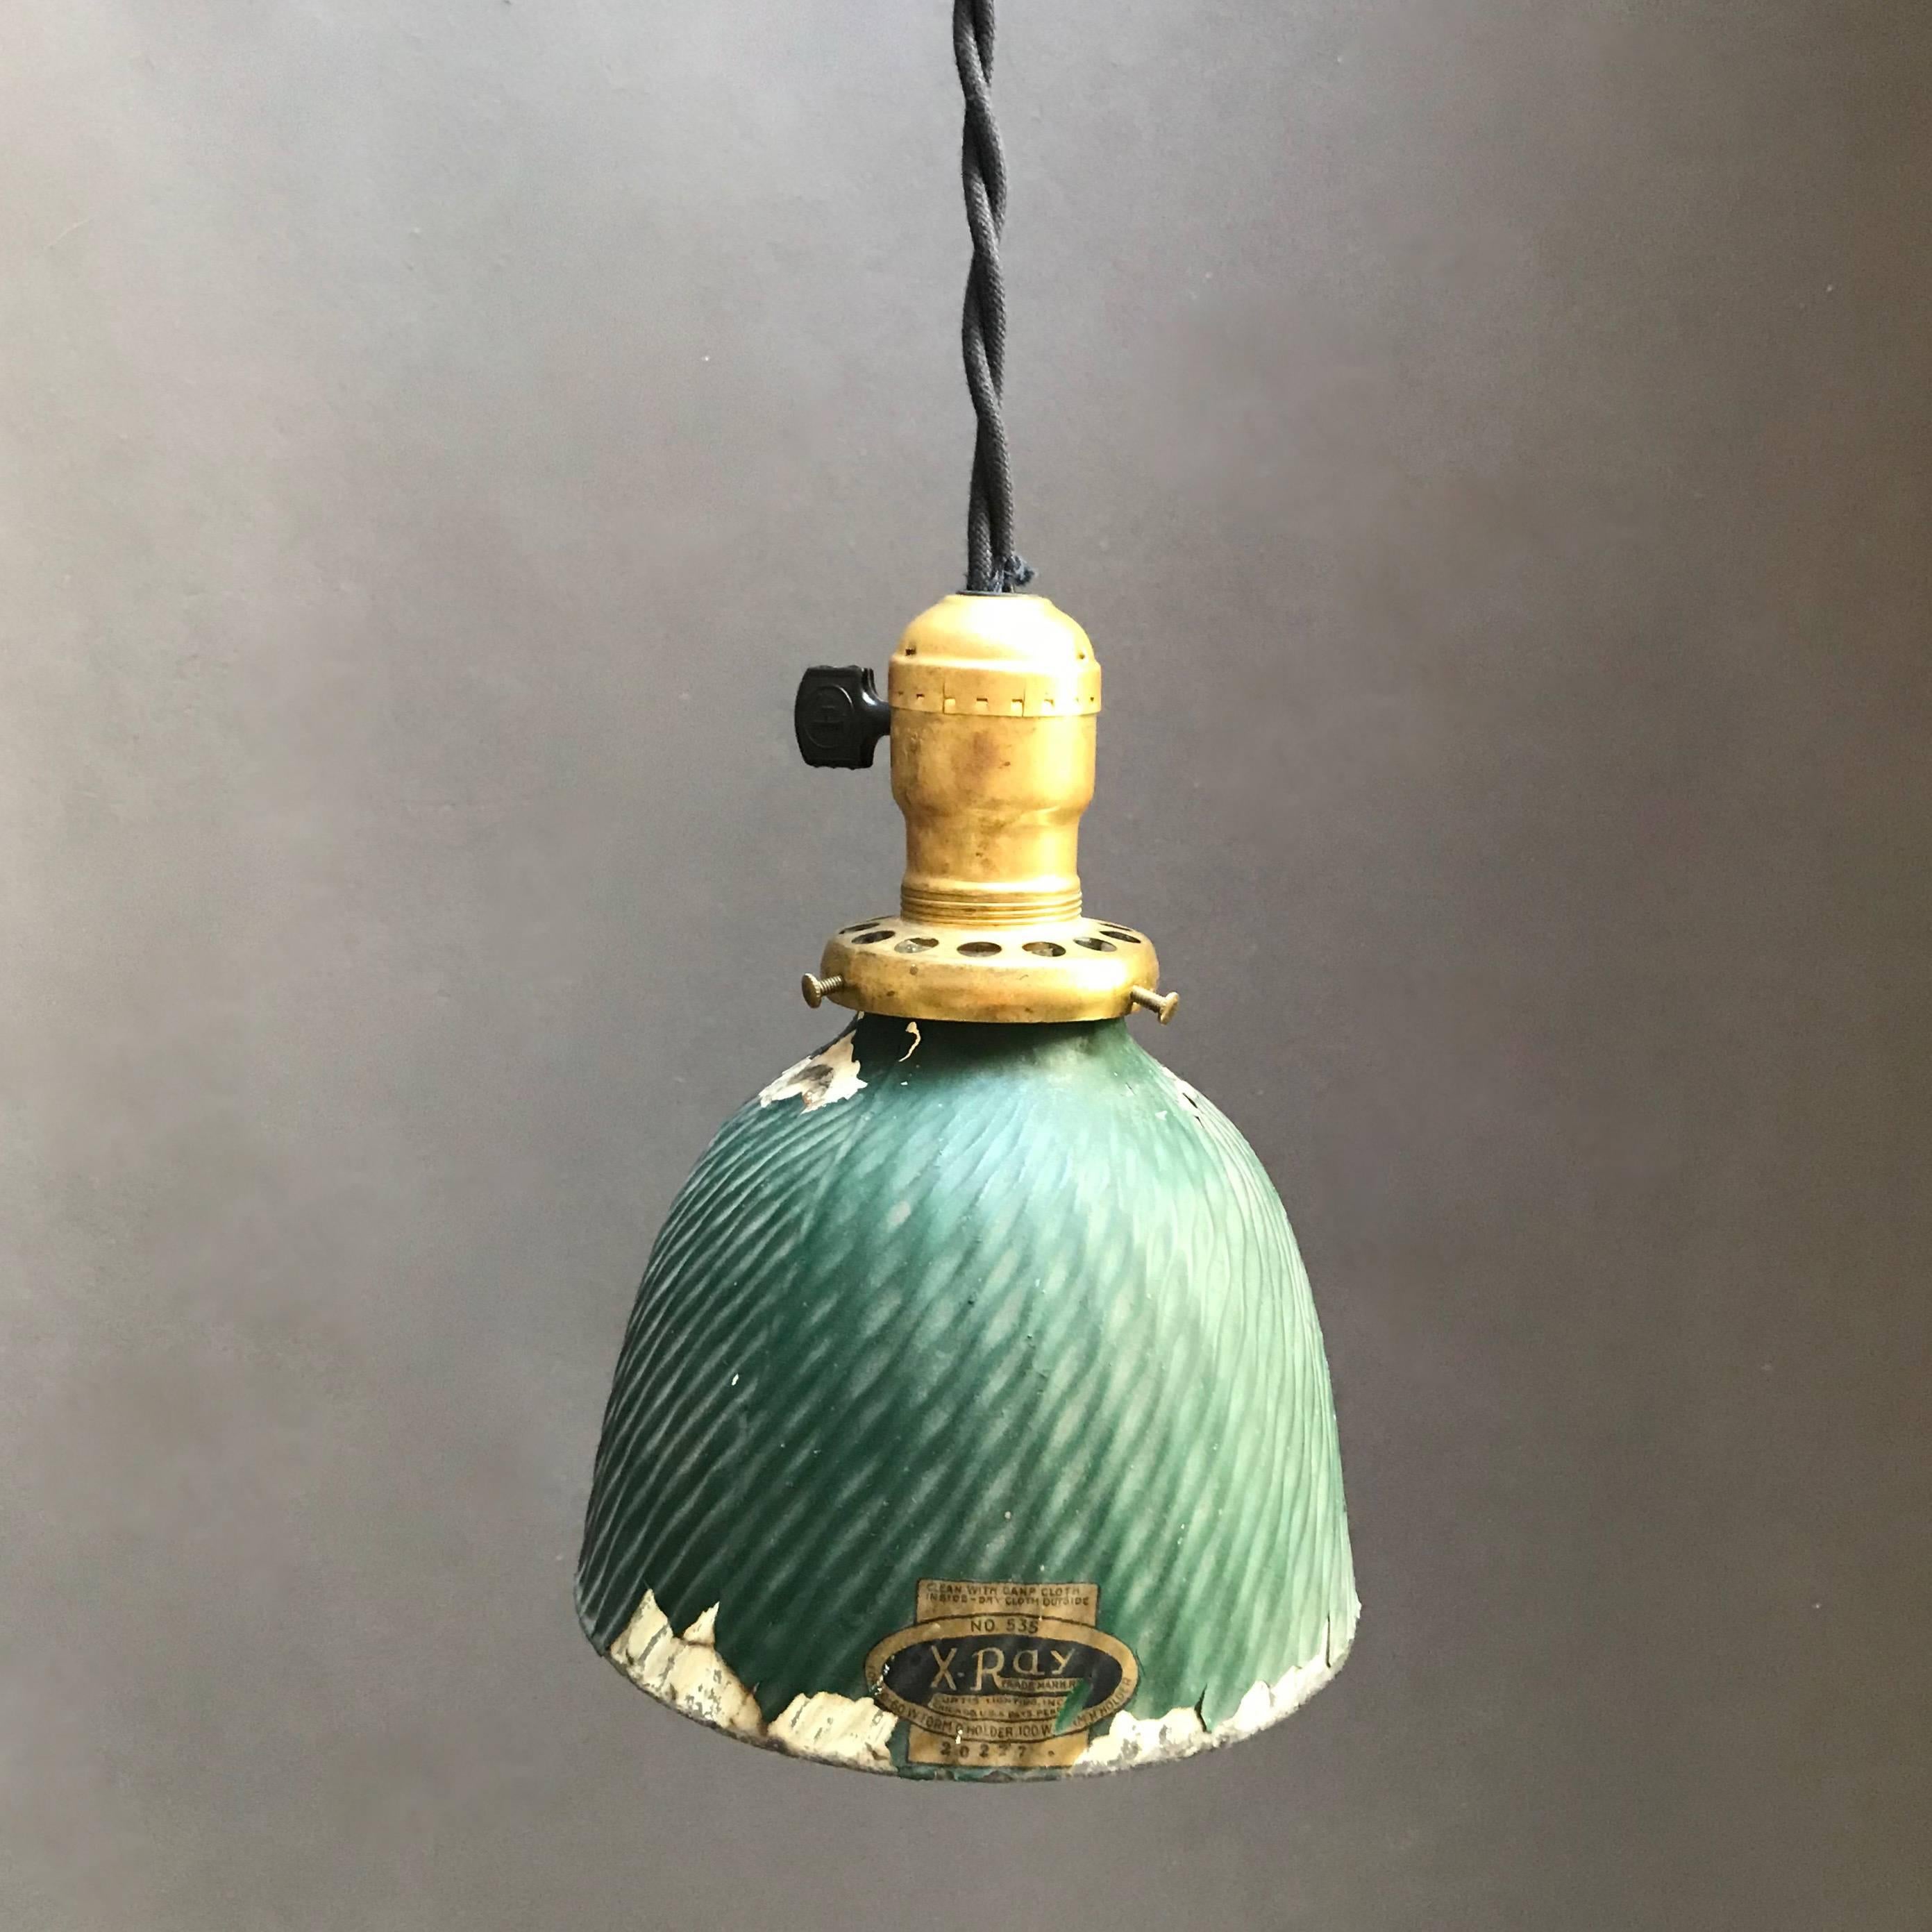 Industrial, factory pendant light features an X-Ray mercury glass dome shade with painted green exterior and brass switch fitter. The pendant is newly wired with 36 inches of black braided cloth cord to accept up to a 150 watt bulb.